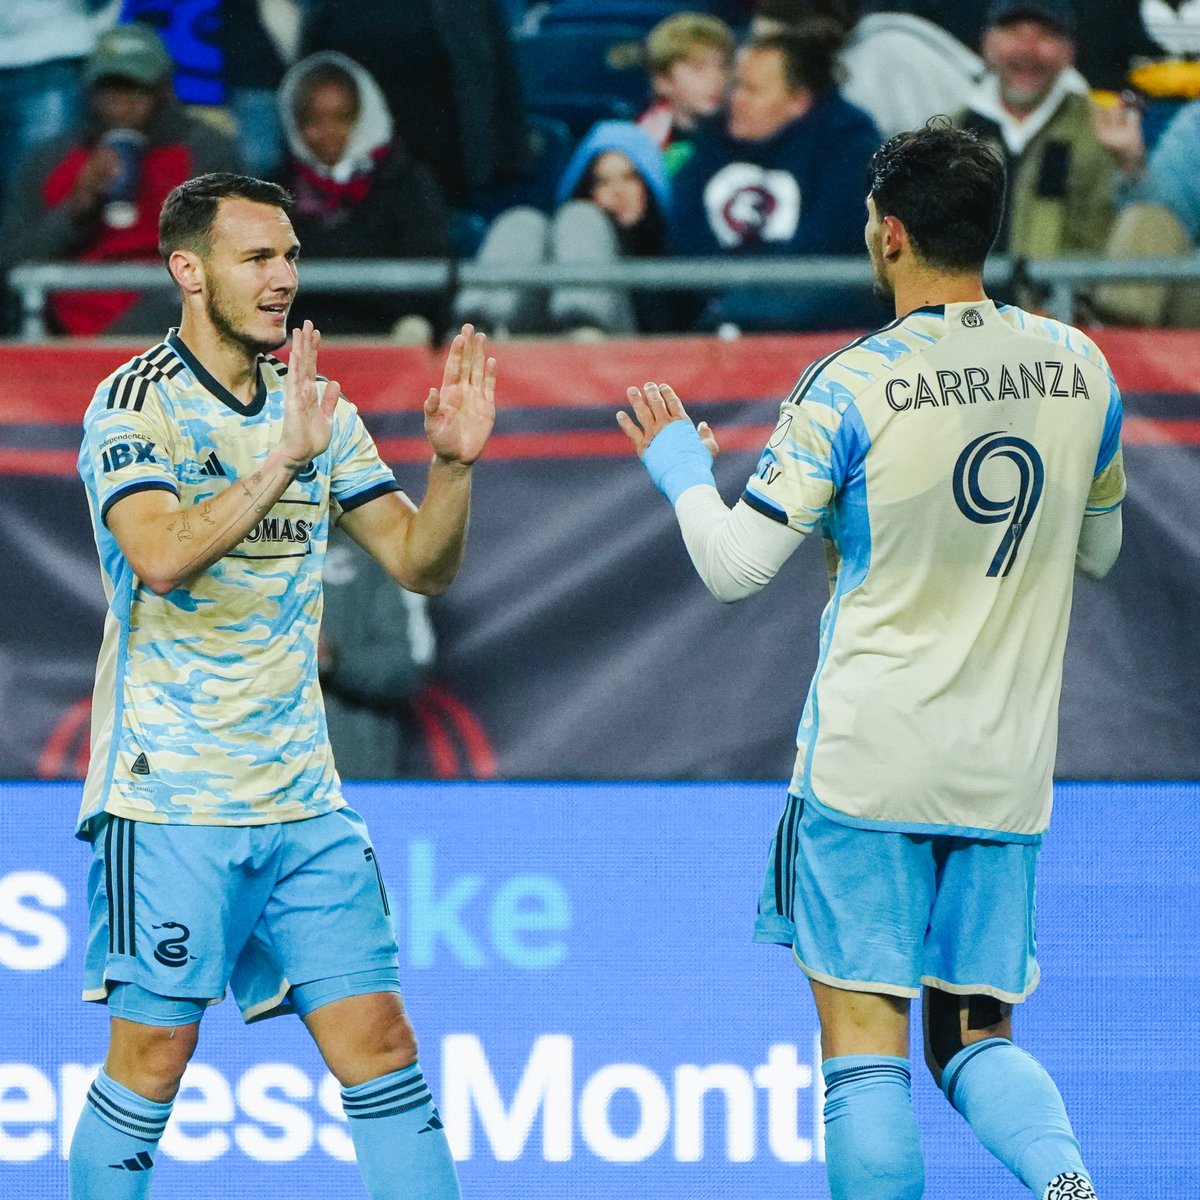 History making duo 🤩 Goalzdag and King Julian have scored in the same match for the 16th time tonight - the most ever by a duo in @MLS history 🙌 #DOOP